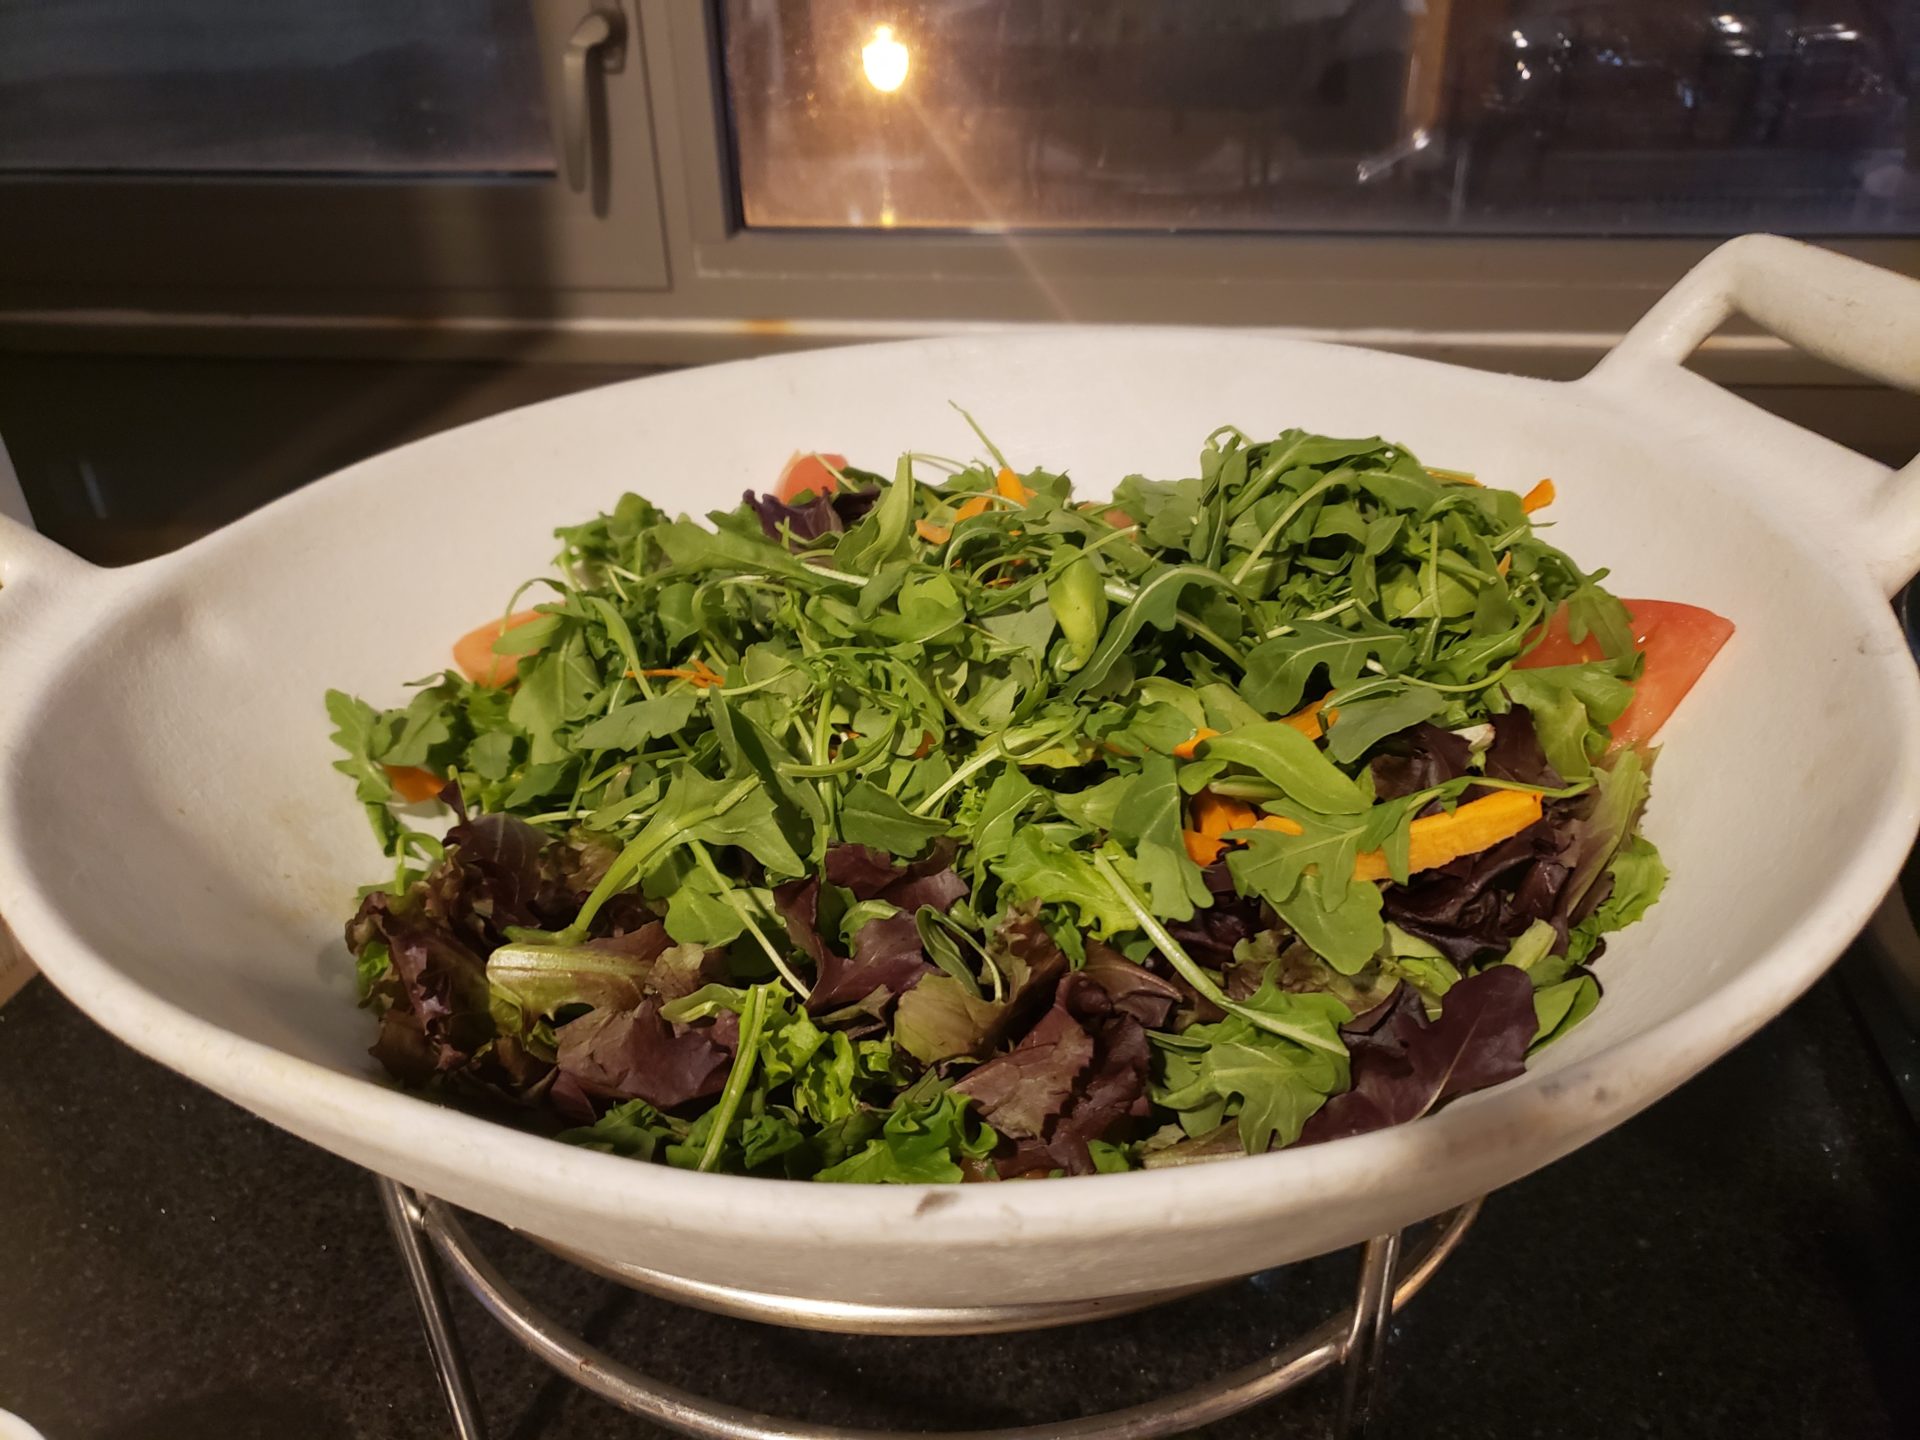 a bowl of salad in a kitchen